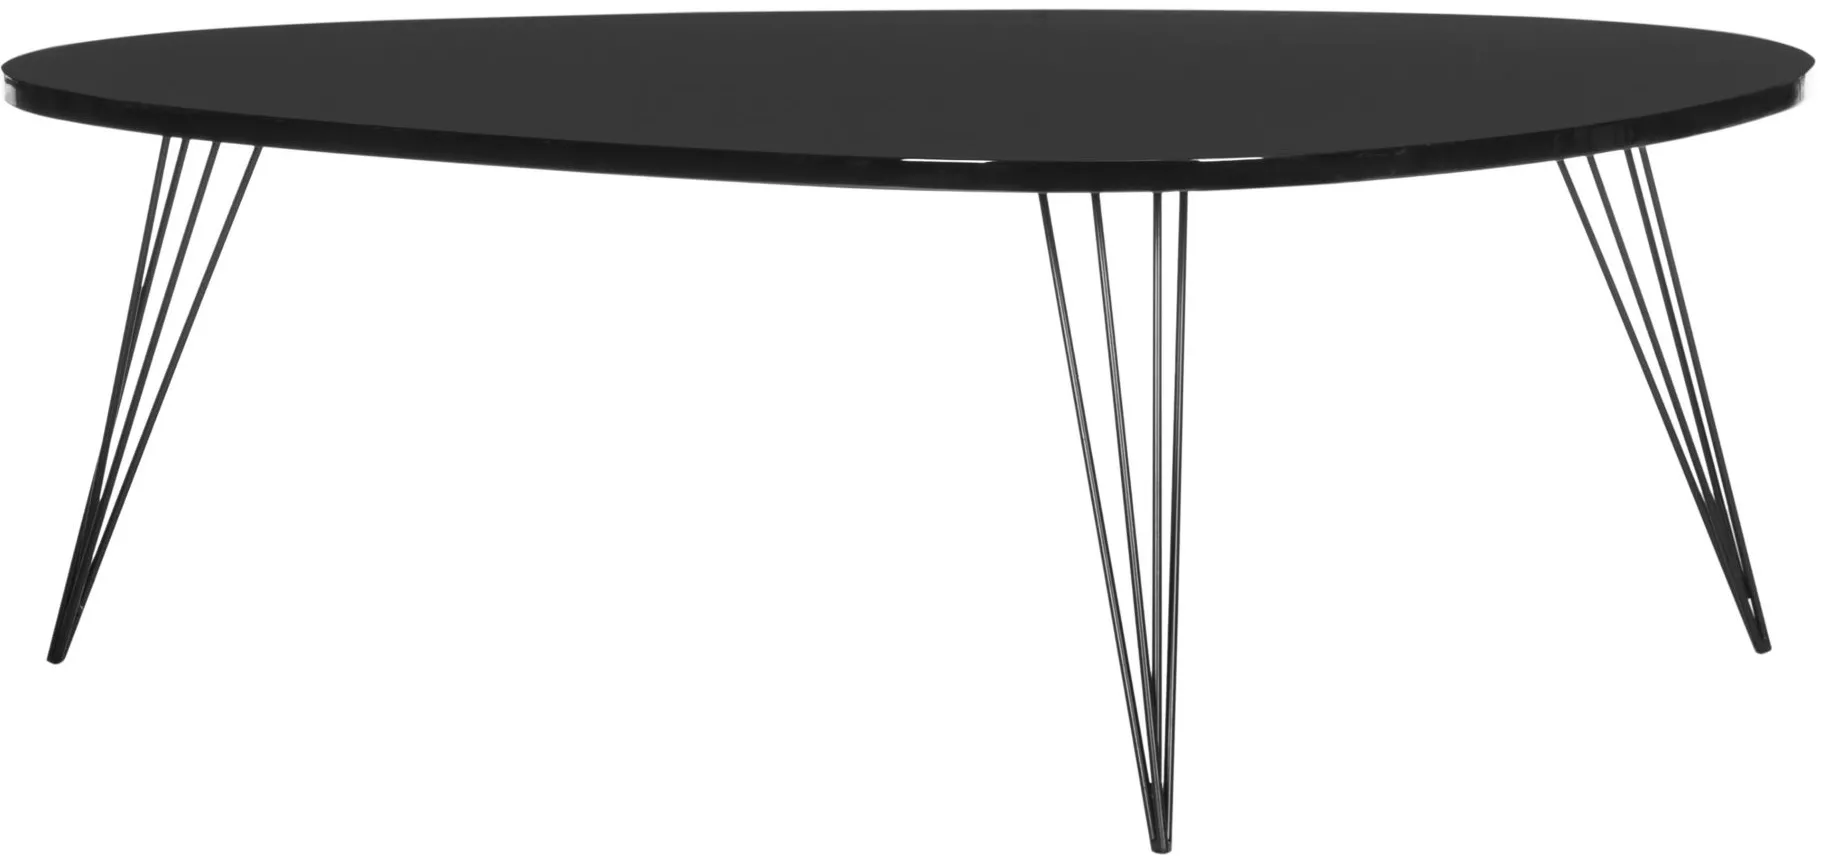 Werner Coffee Table in Black by Safavieh